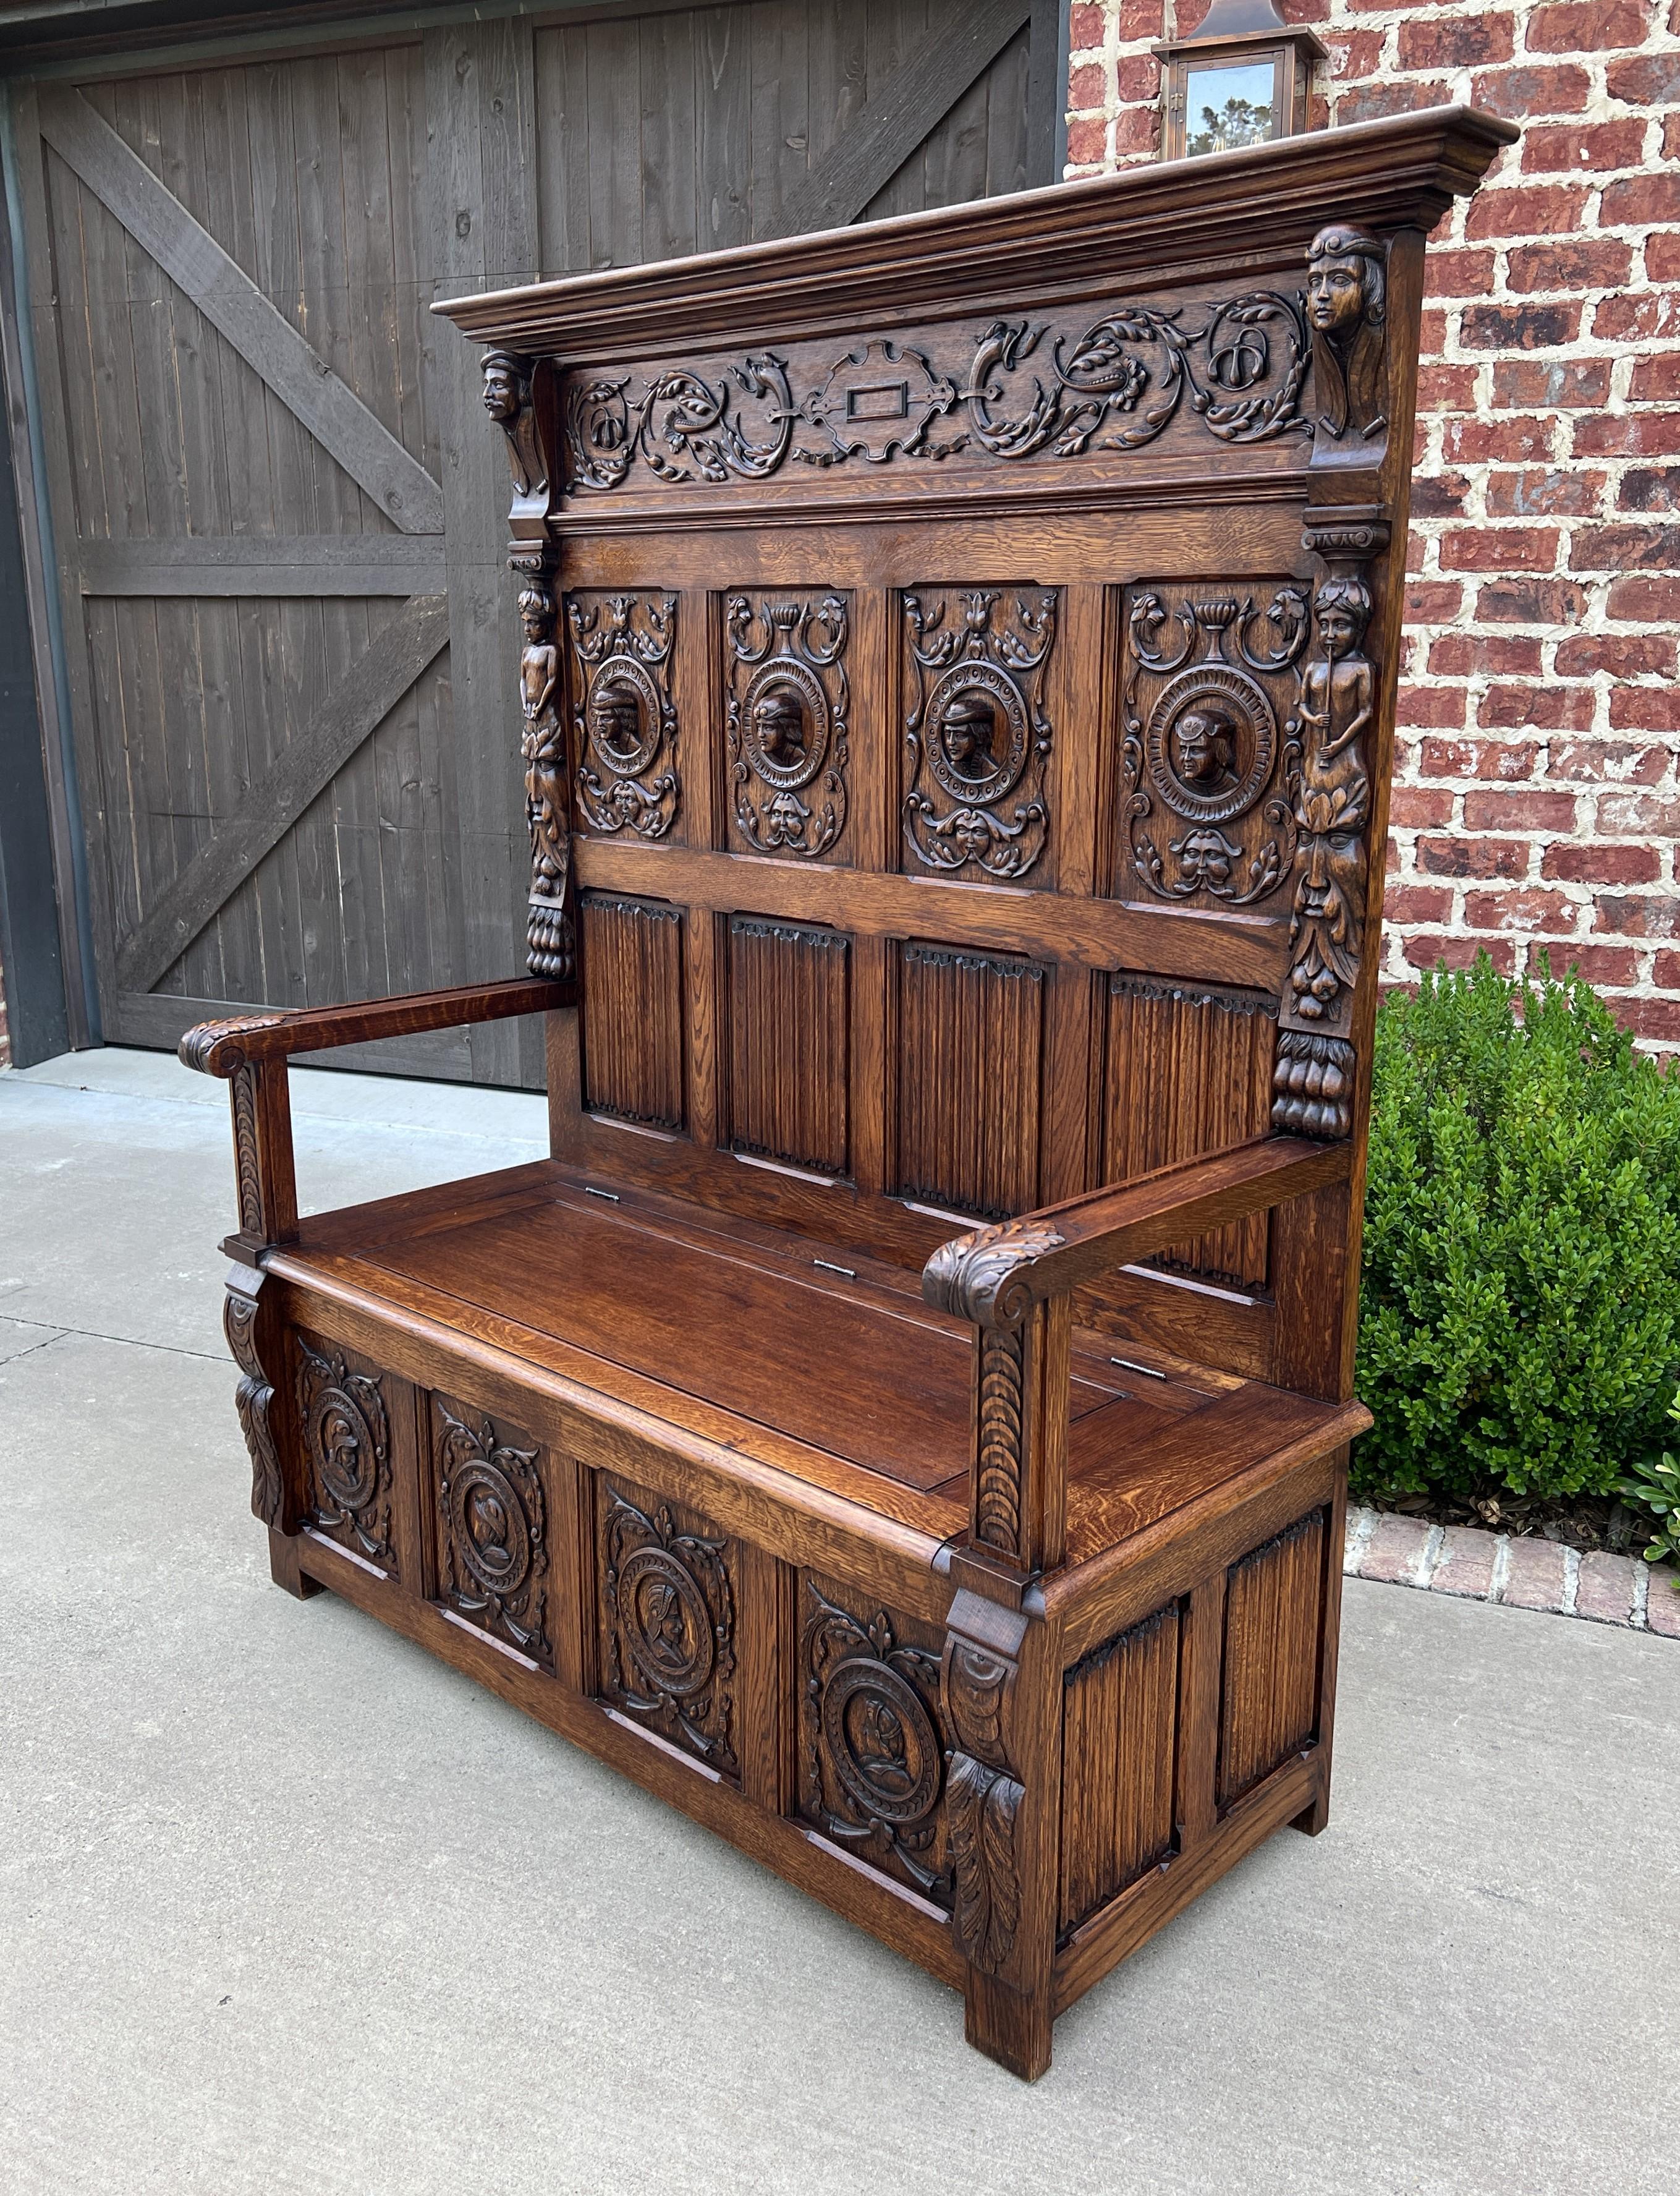 Carved Antique French Bench Chair Settee Hall Bench Trunk Renaissance Revival Oak 19thC